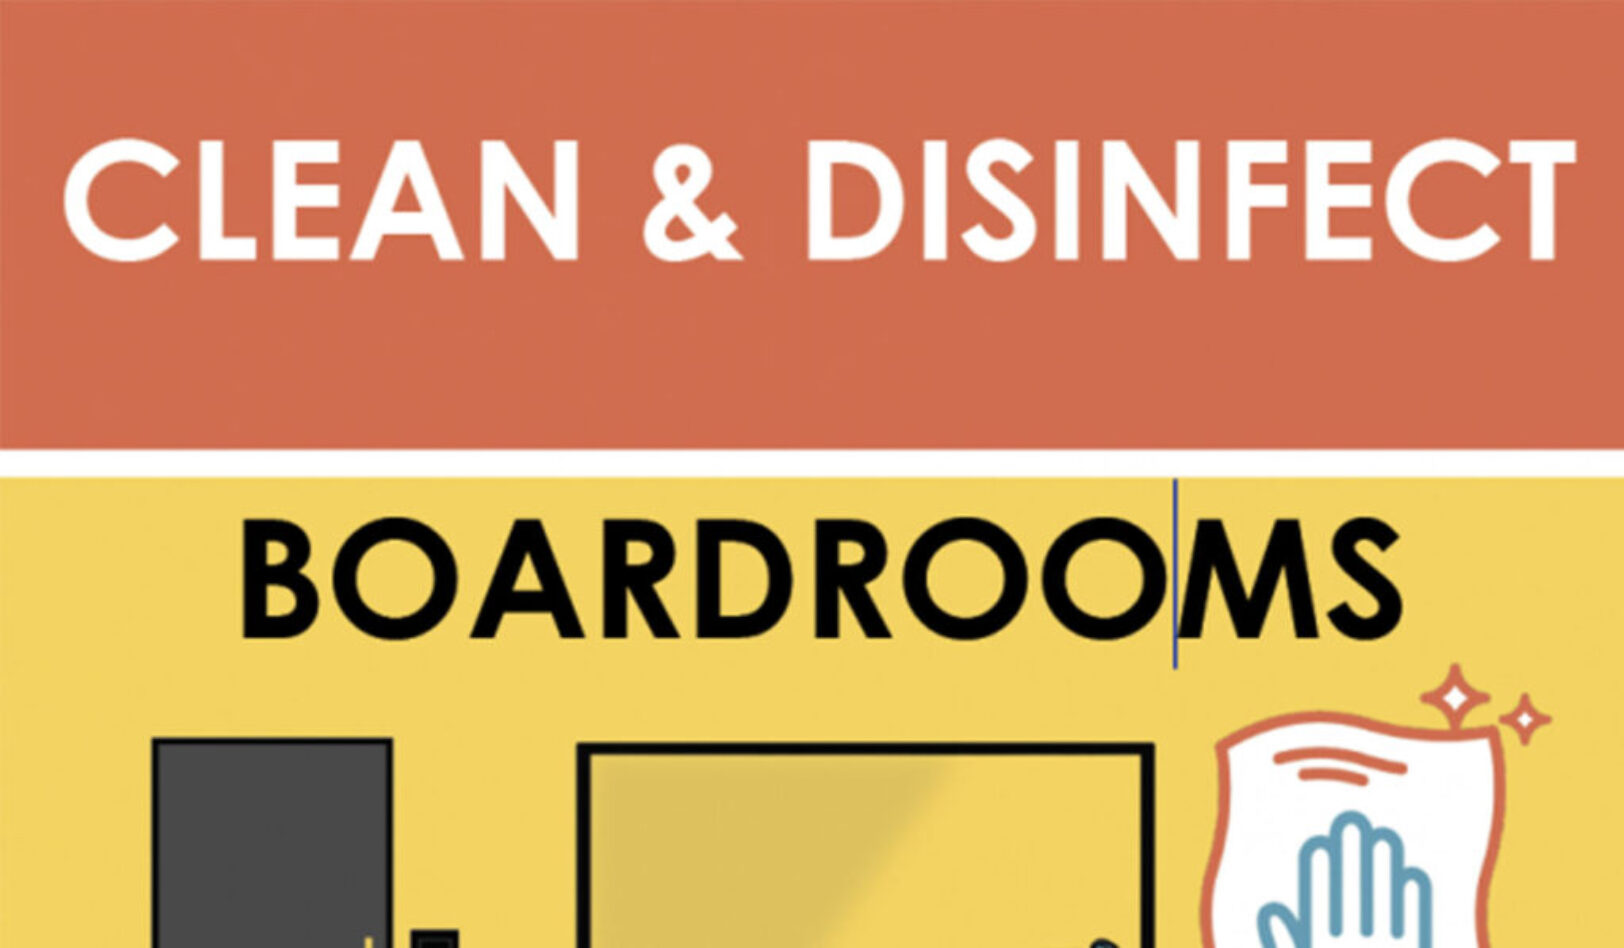 Clean & Disinfect: BOARDROOMS